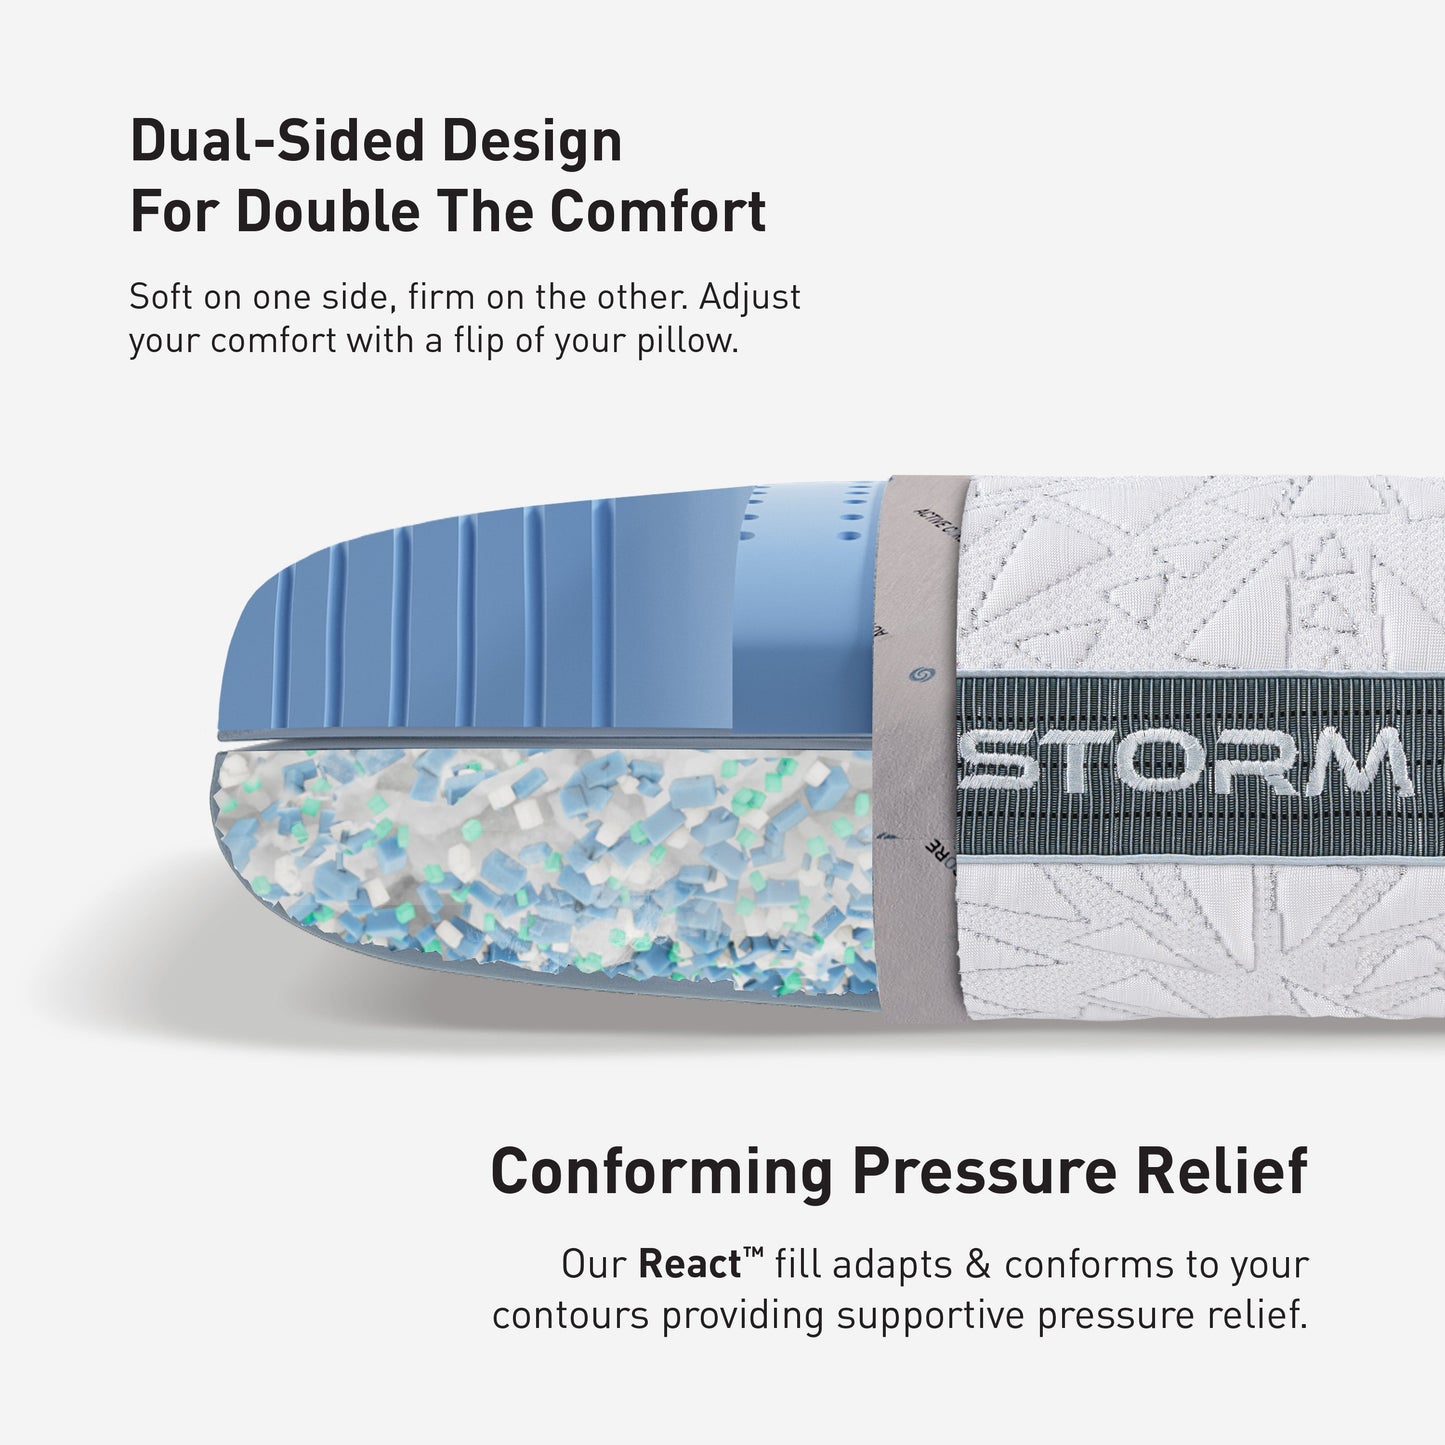 Bedgear Storm II Performance Pillow Dual-Sided Design and Conforming Pressure Relief